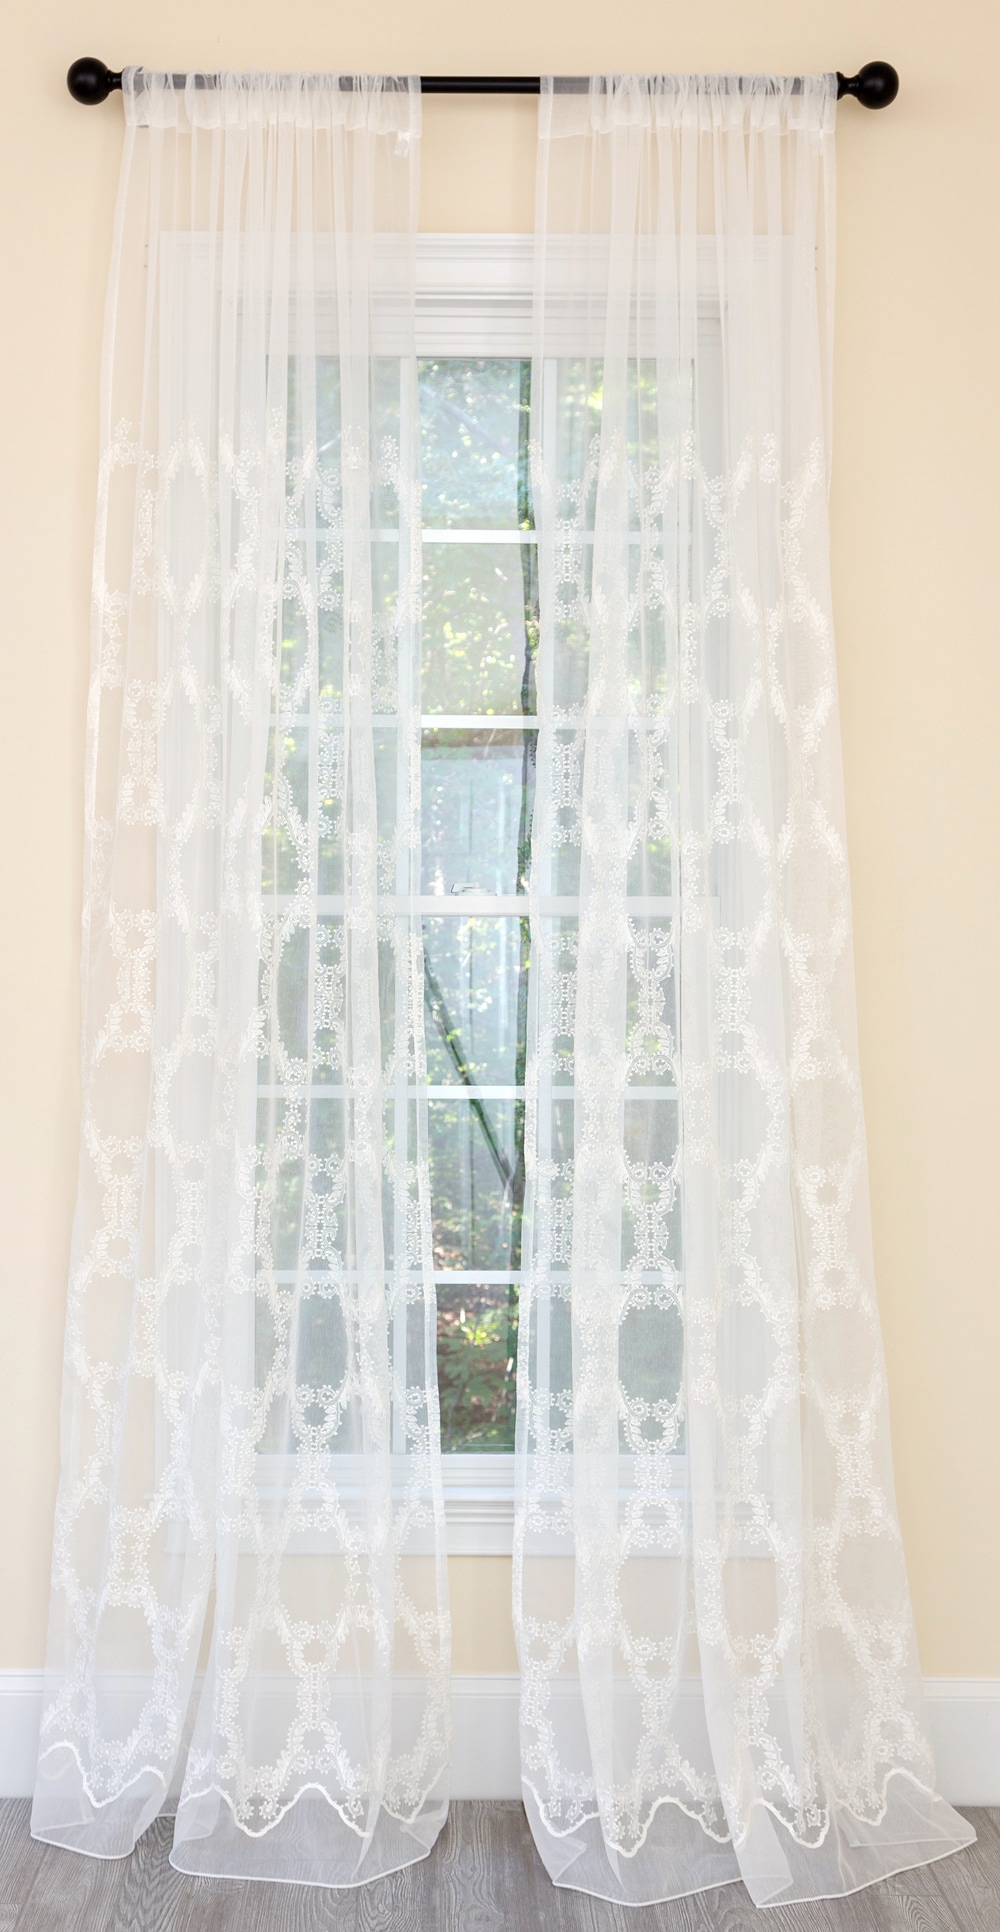 Krystal Clear Sheer Curtains & Drapes at Lowes.com